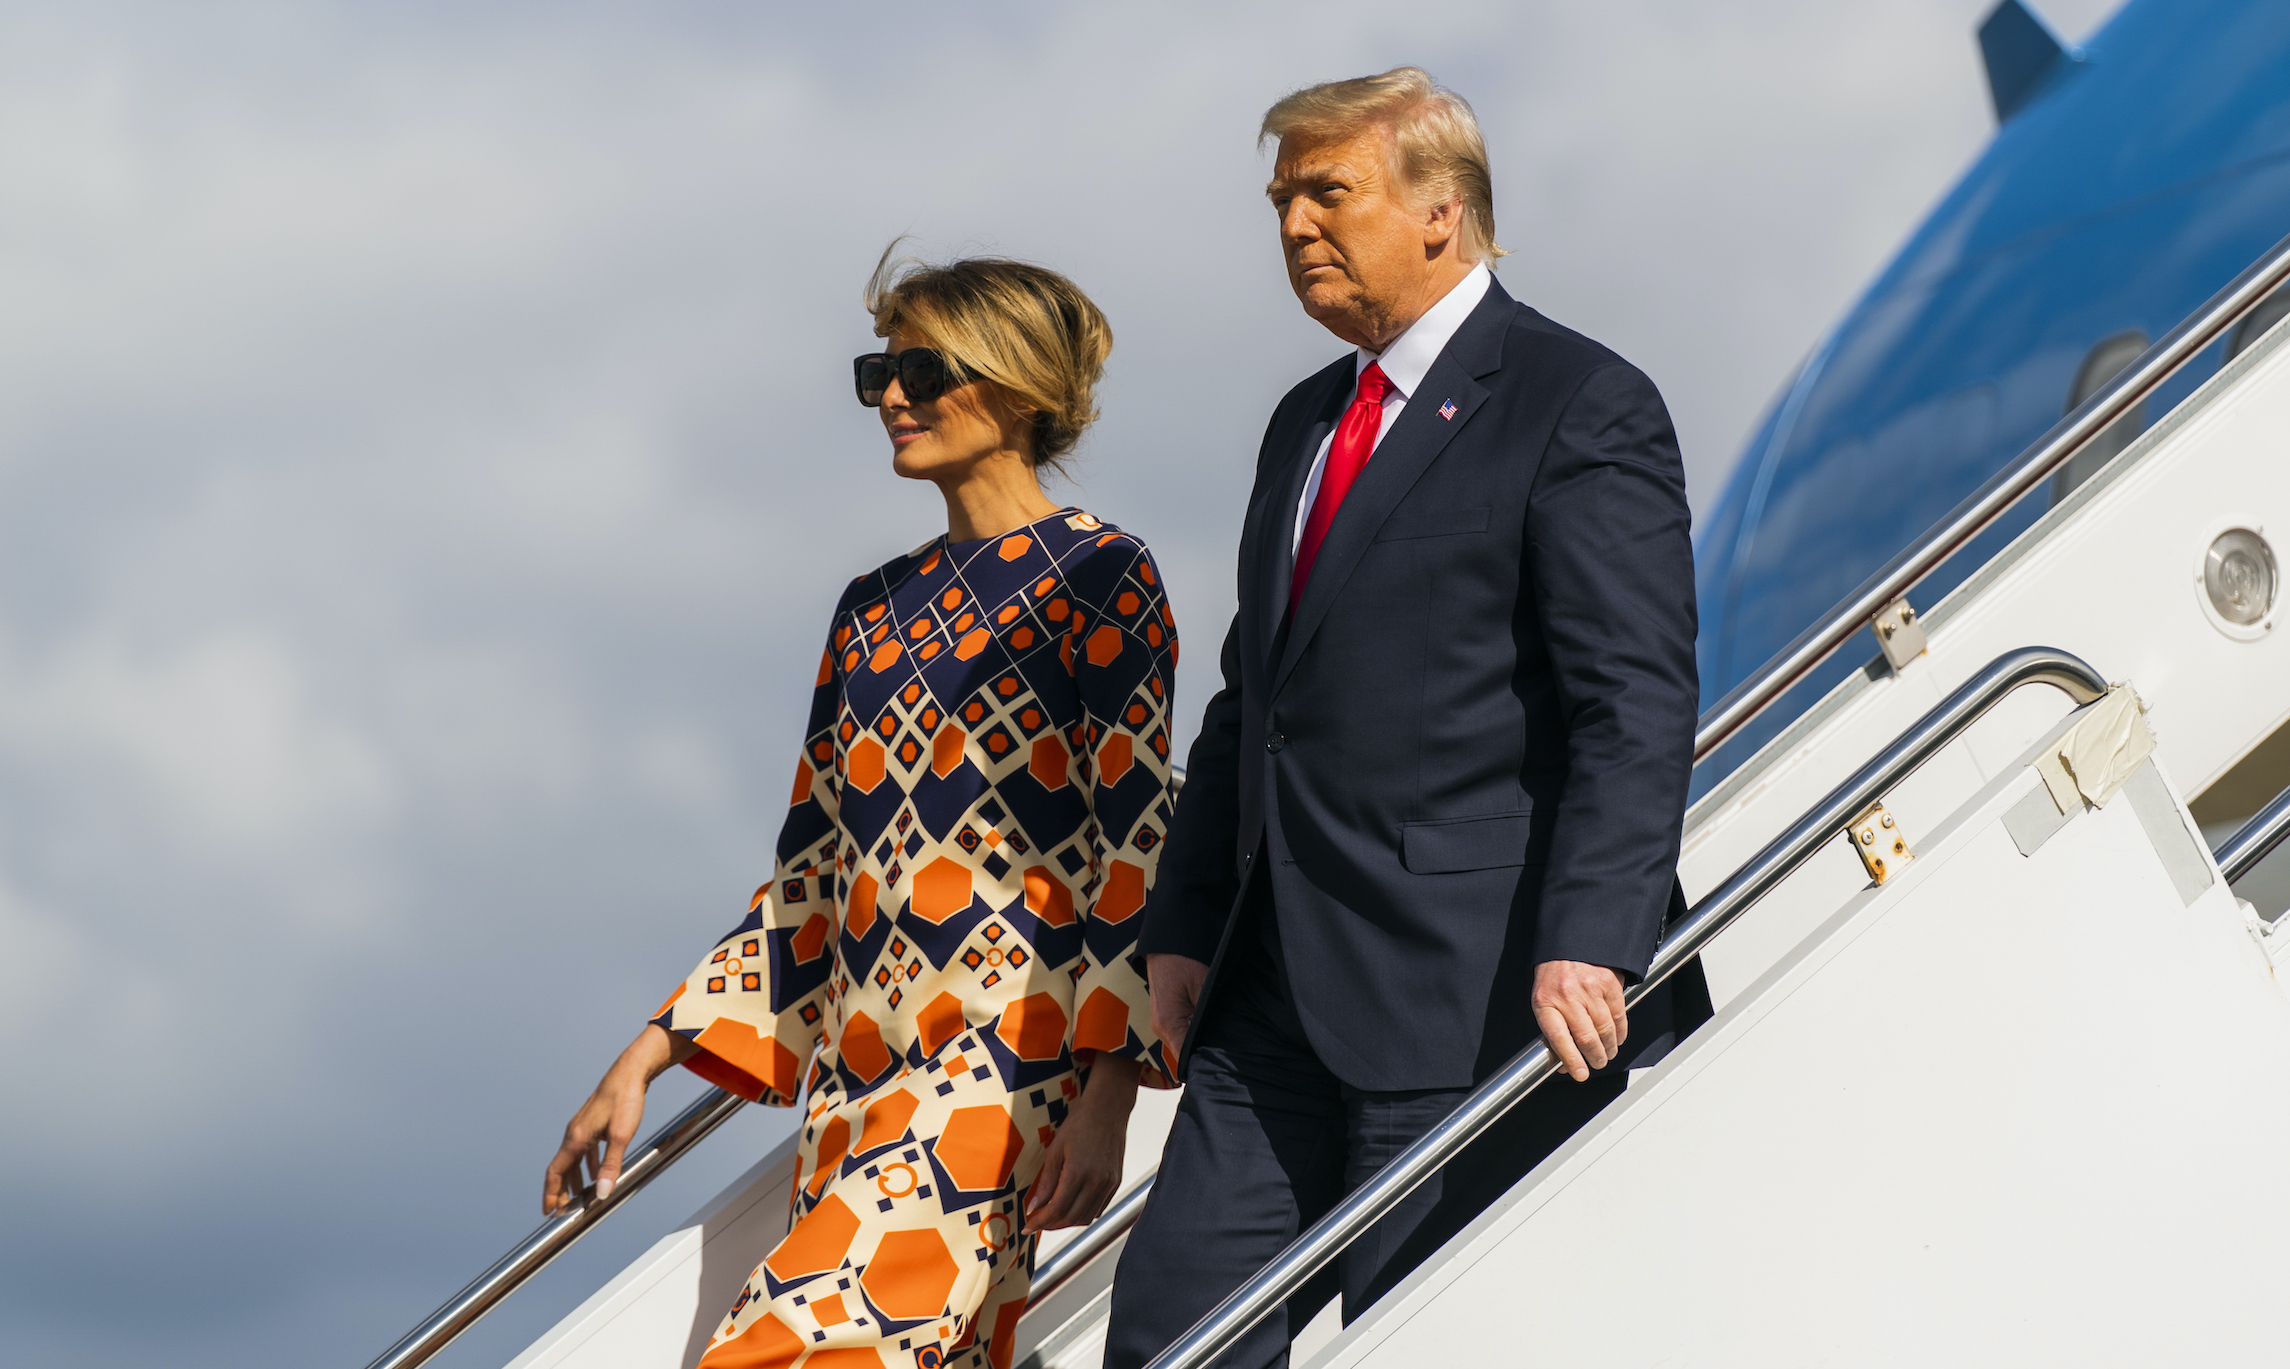 Former President Donald Trump and his wife Melania Trump disembark from their final flight on Air Force One at Palm Beach International Airport in West Palm Beach, Florida, on Wednesday.